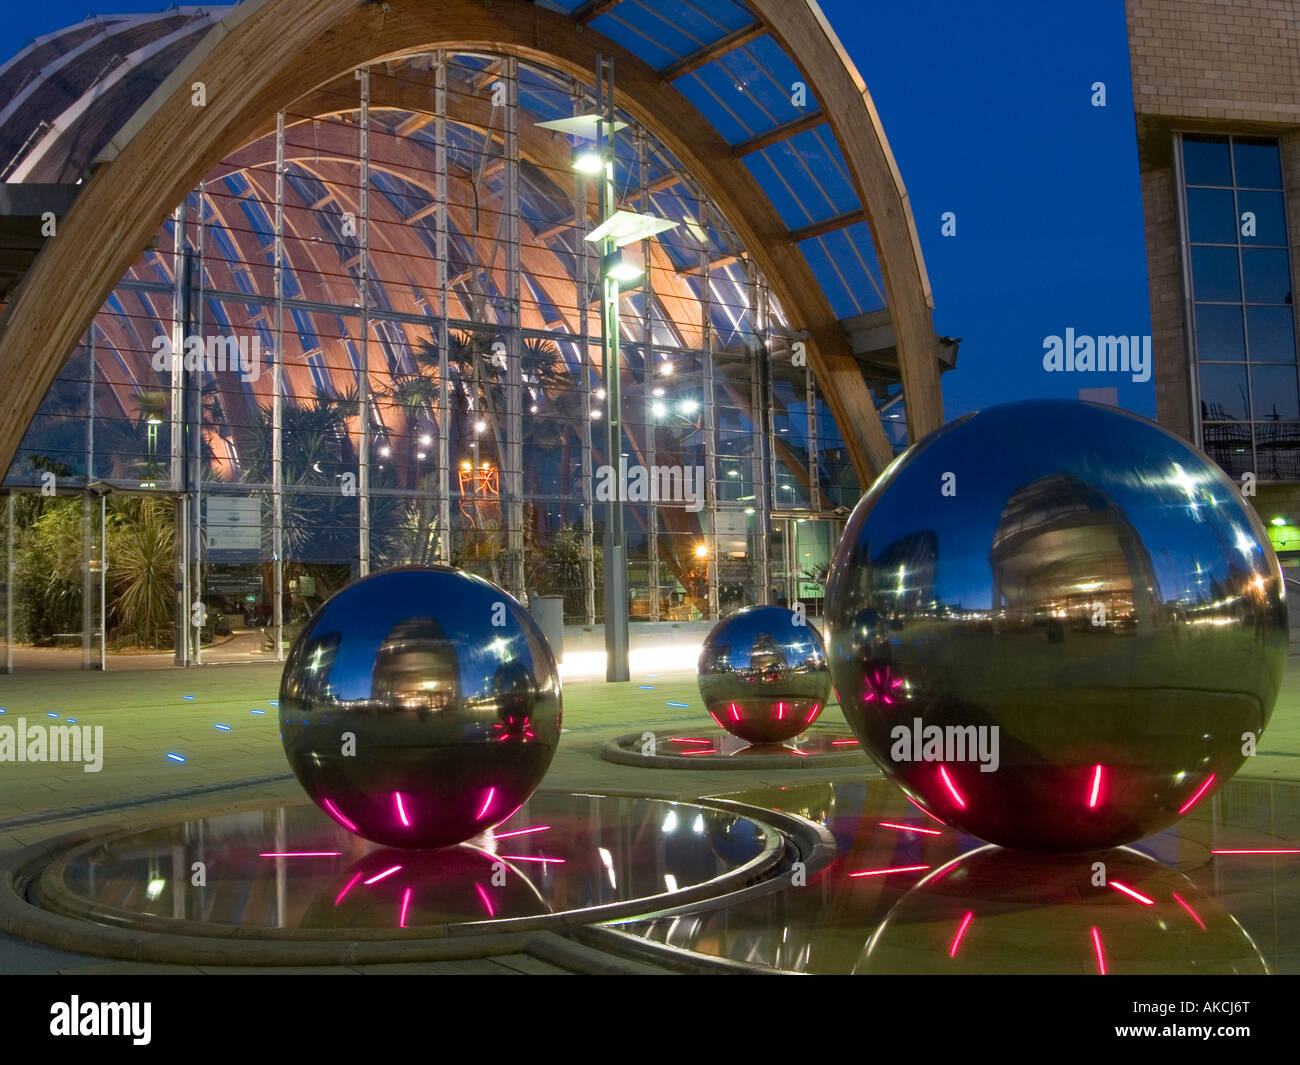 The Winter Garden and Millenium Square at dusk, with spheres that form part of the sculpture 'Rain' Sheffield City Centre UK Stock Photo